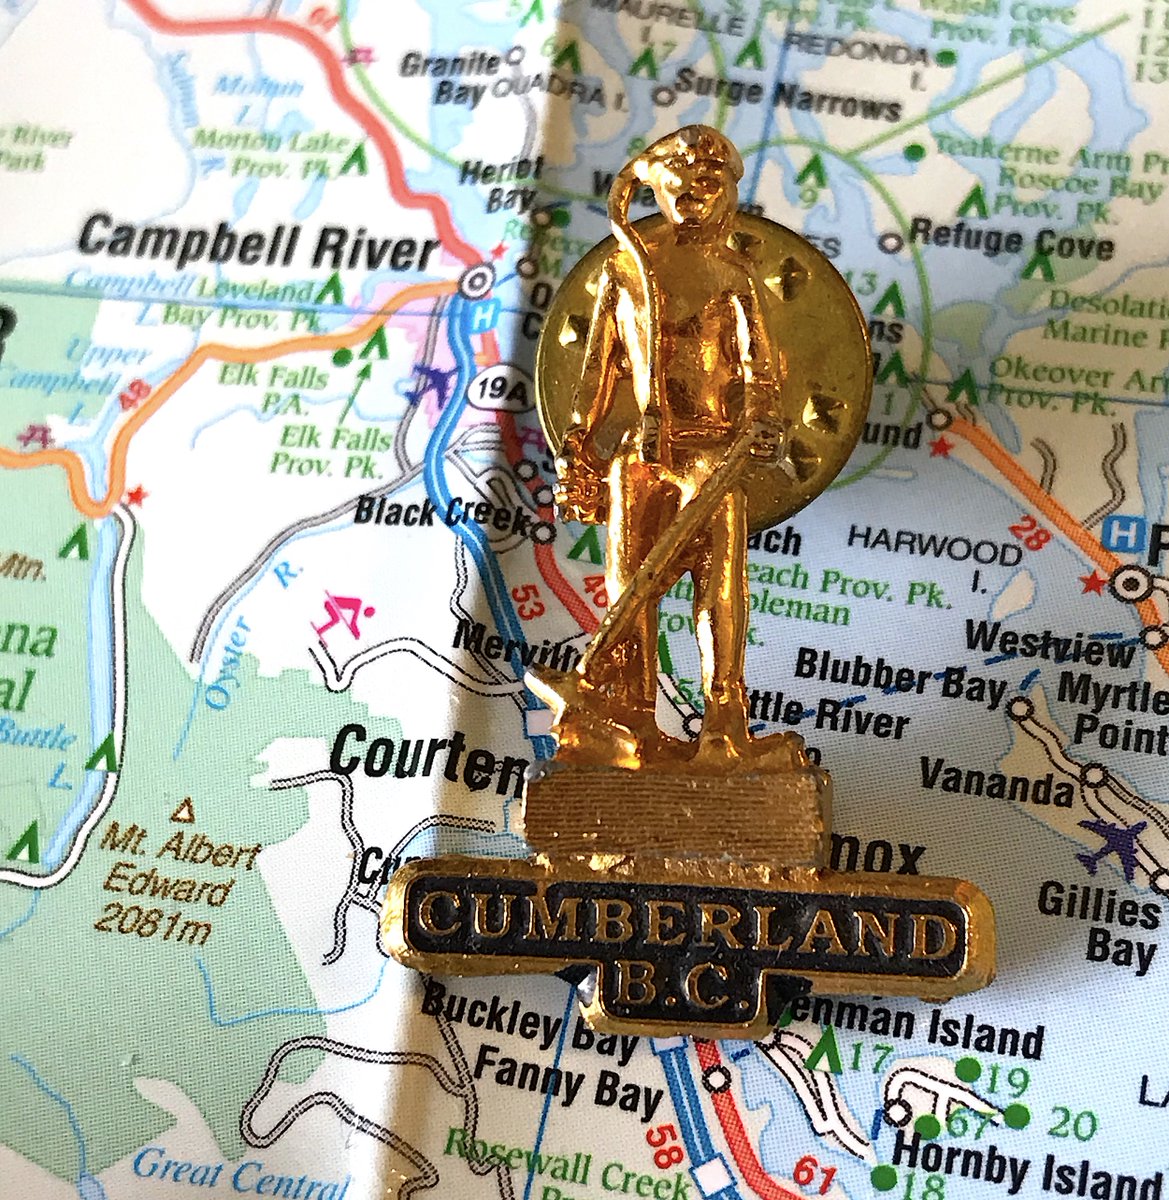 88. CUMBERLAND- Heck yes let's celebrate the town's mining past- Unfortunately, the actual design makes it hard to really see the details in the design- Also again, not really a pin, still fun!